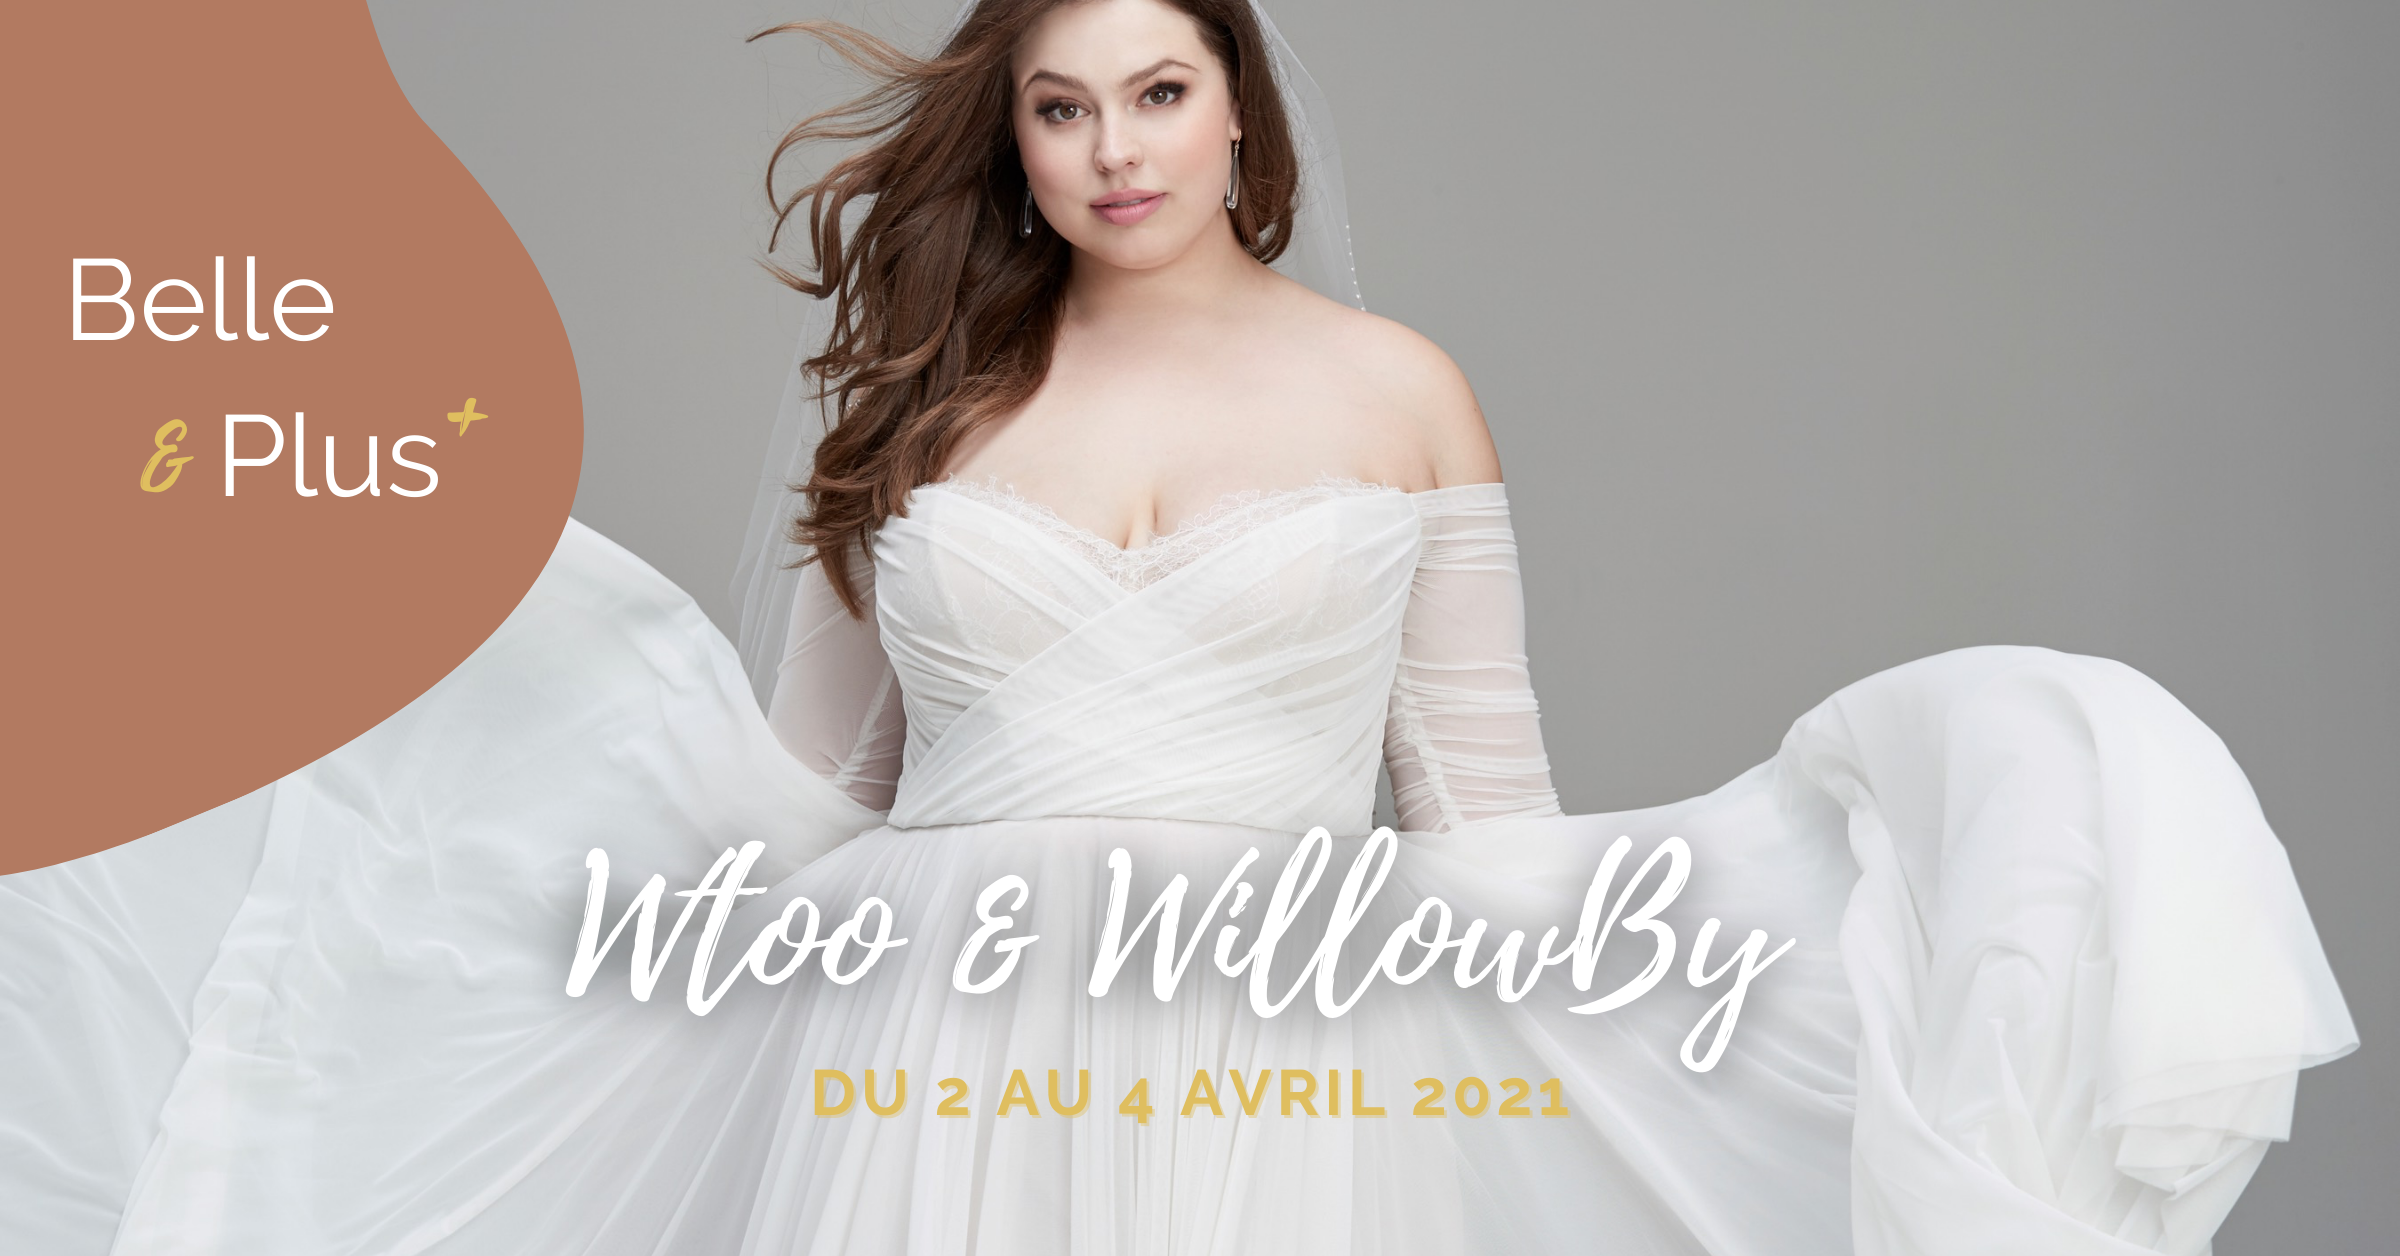 WTOO & WILLOWBY – PLUS-SIZE FROM APRIL 2 TO APRIL 4